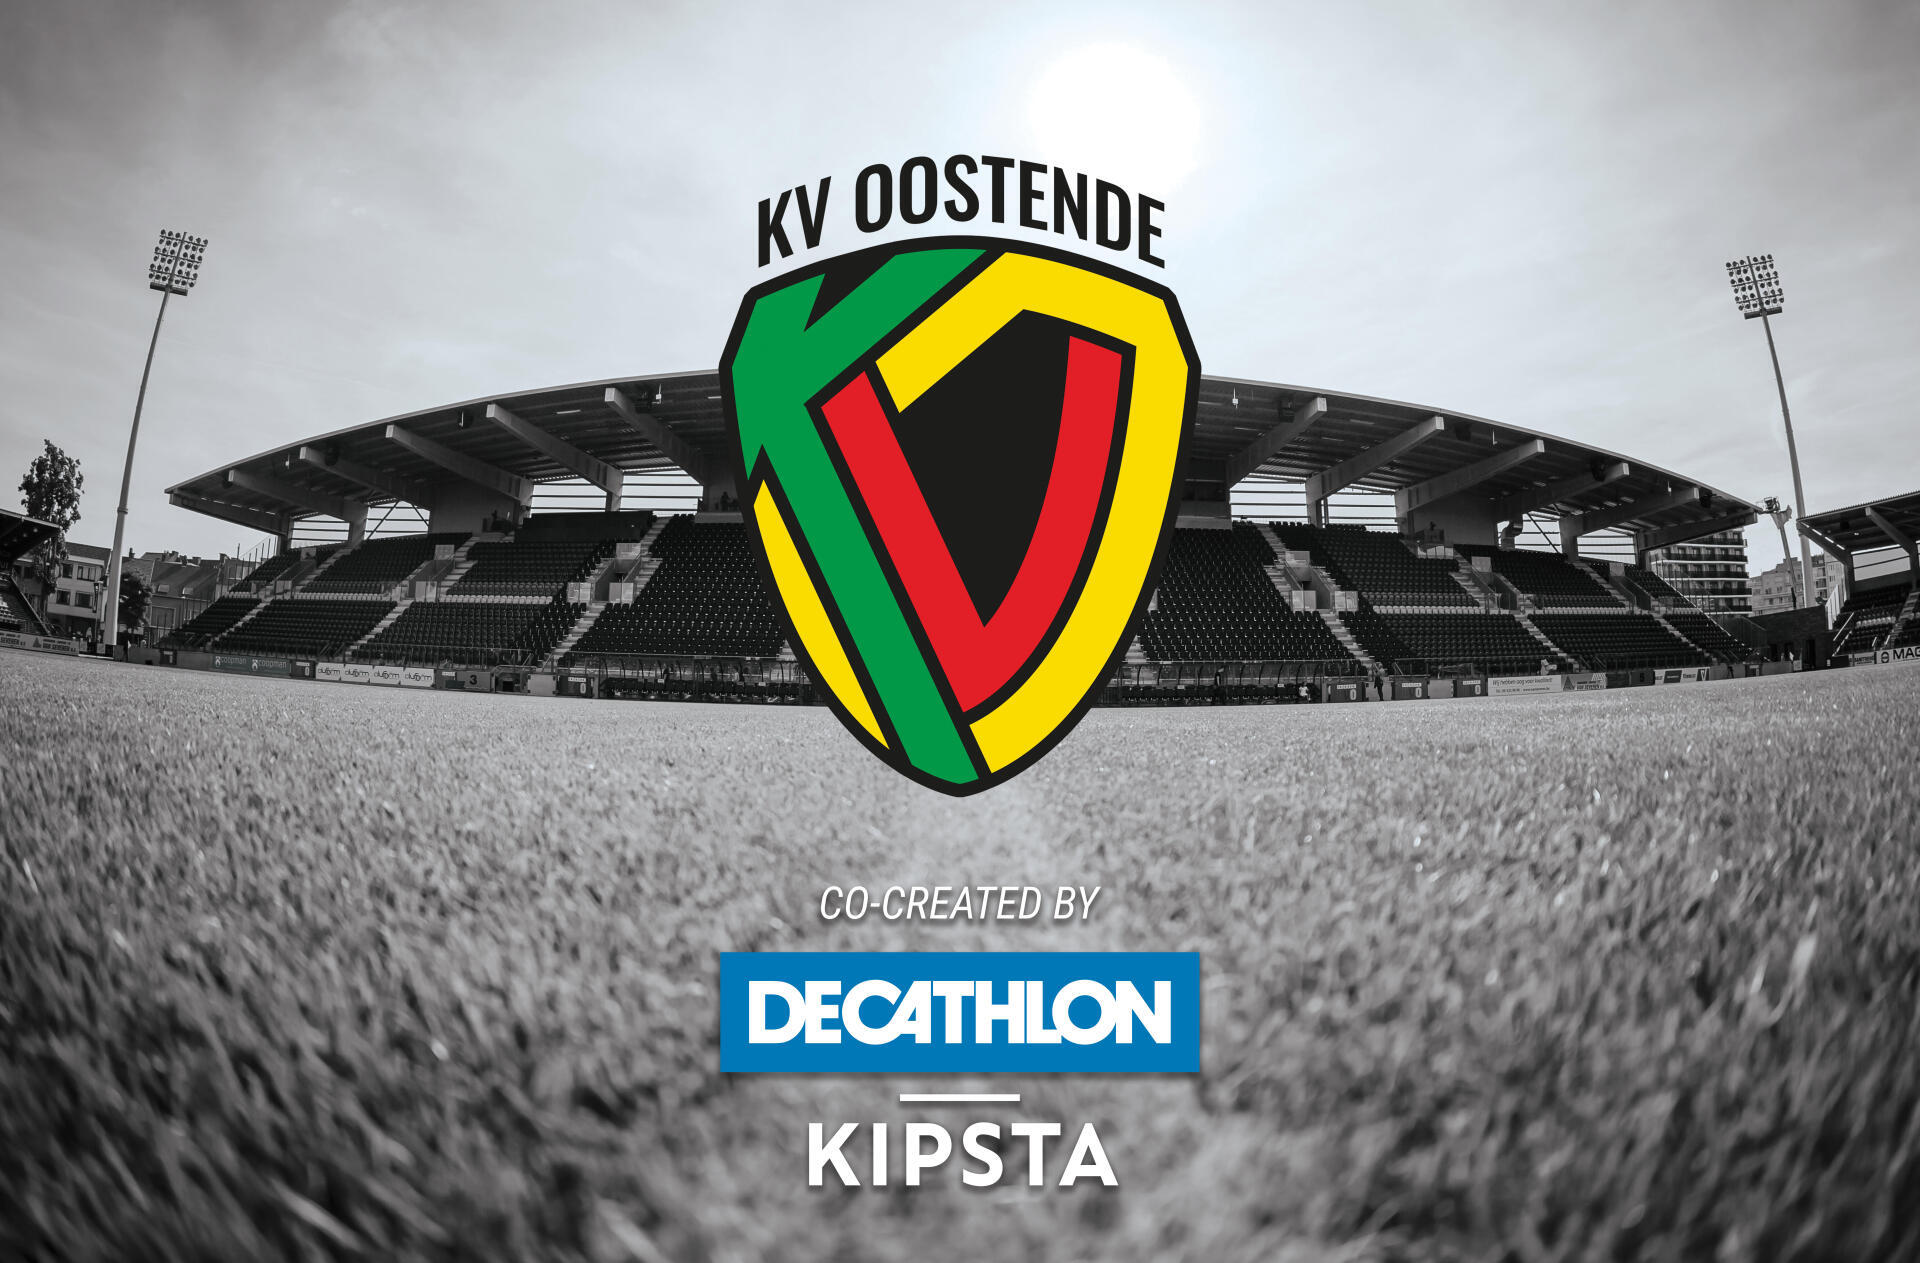 KV OOSTENDE, A NEW LOGO CO-DESIGNED WITH KIPSTA